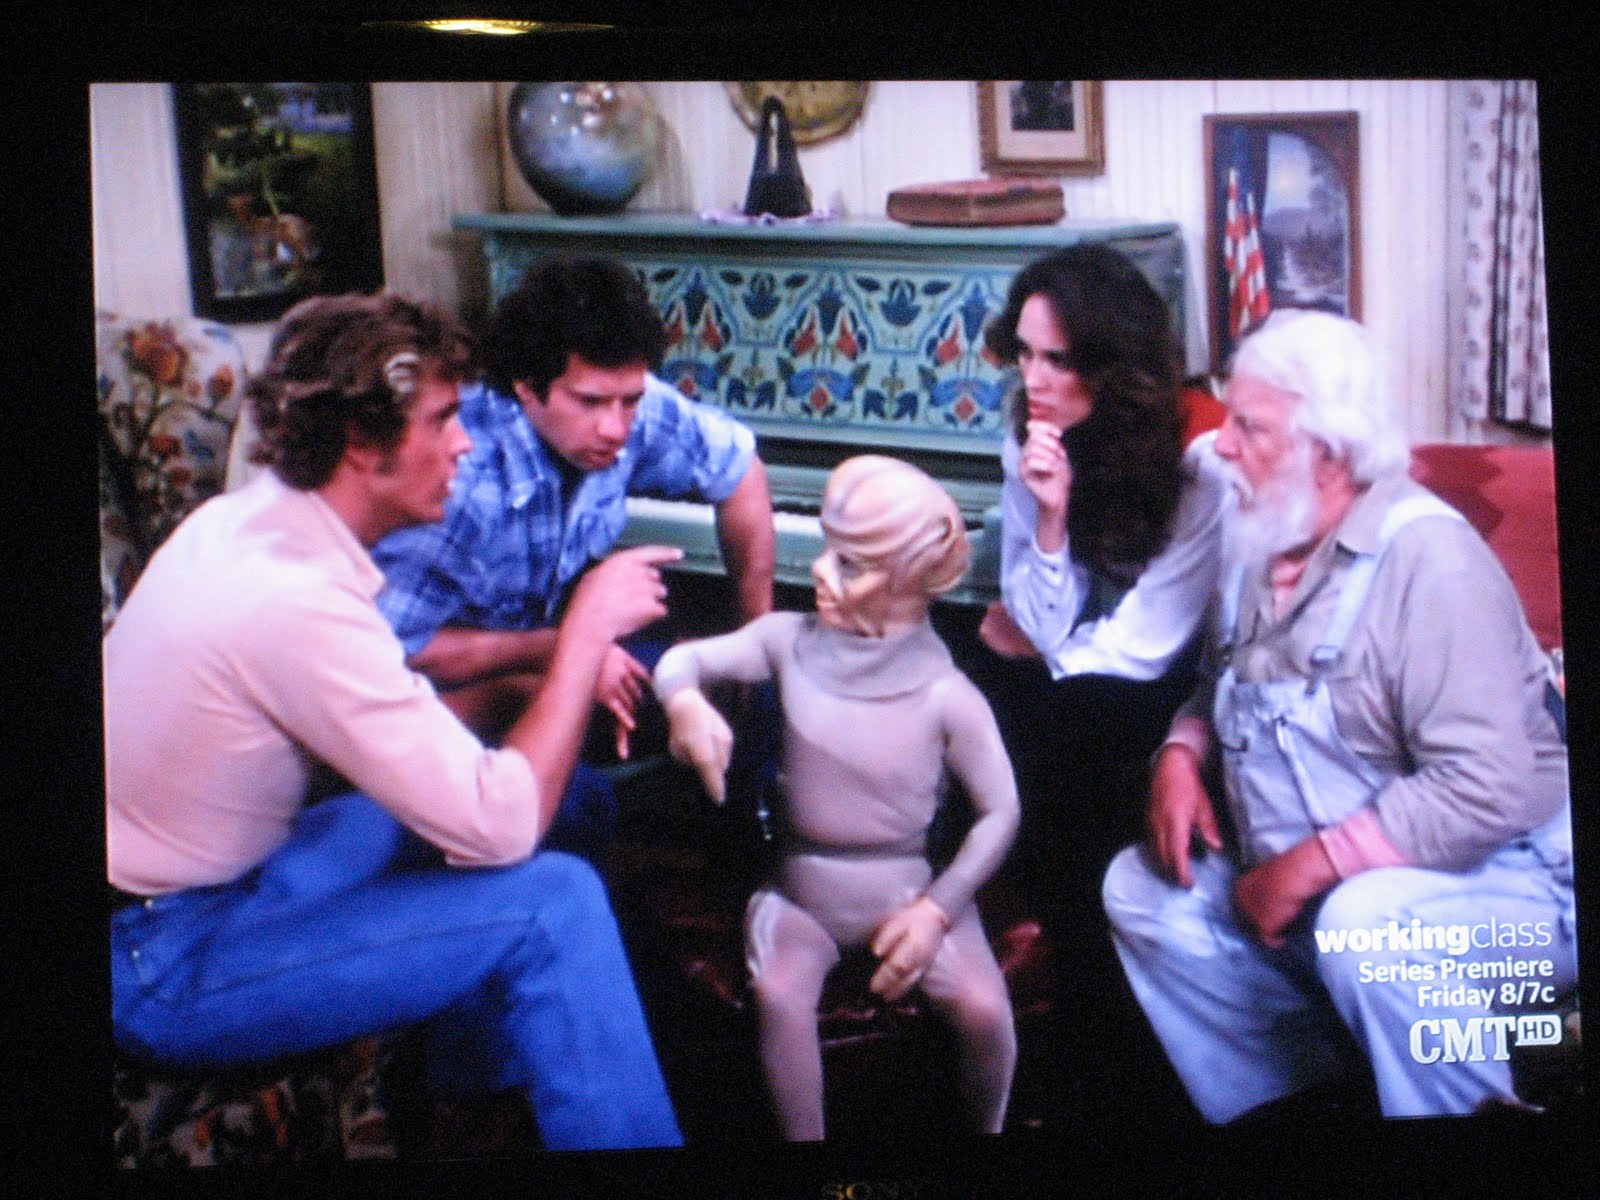 The Dukes of Hazard once decided they really needed to do an episode with an alien  ¯\_(ツ)_/¯